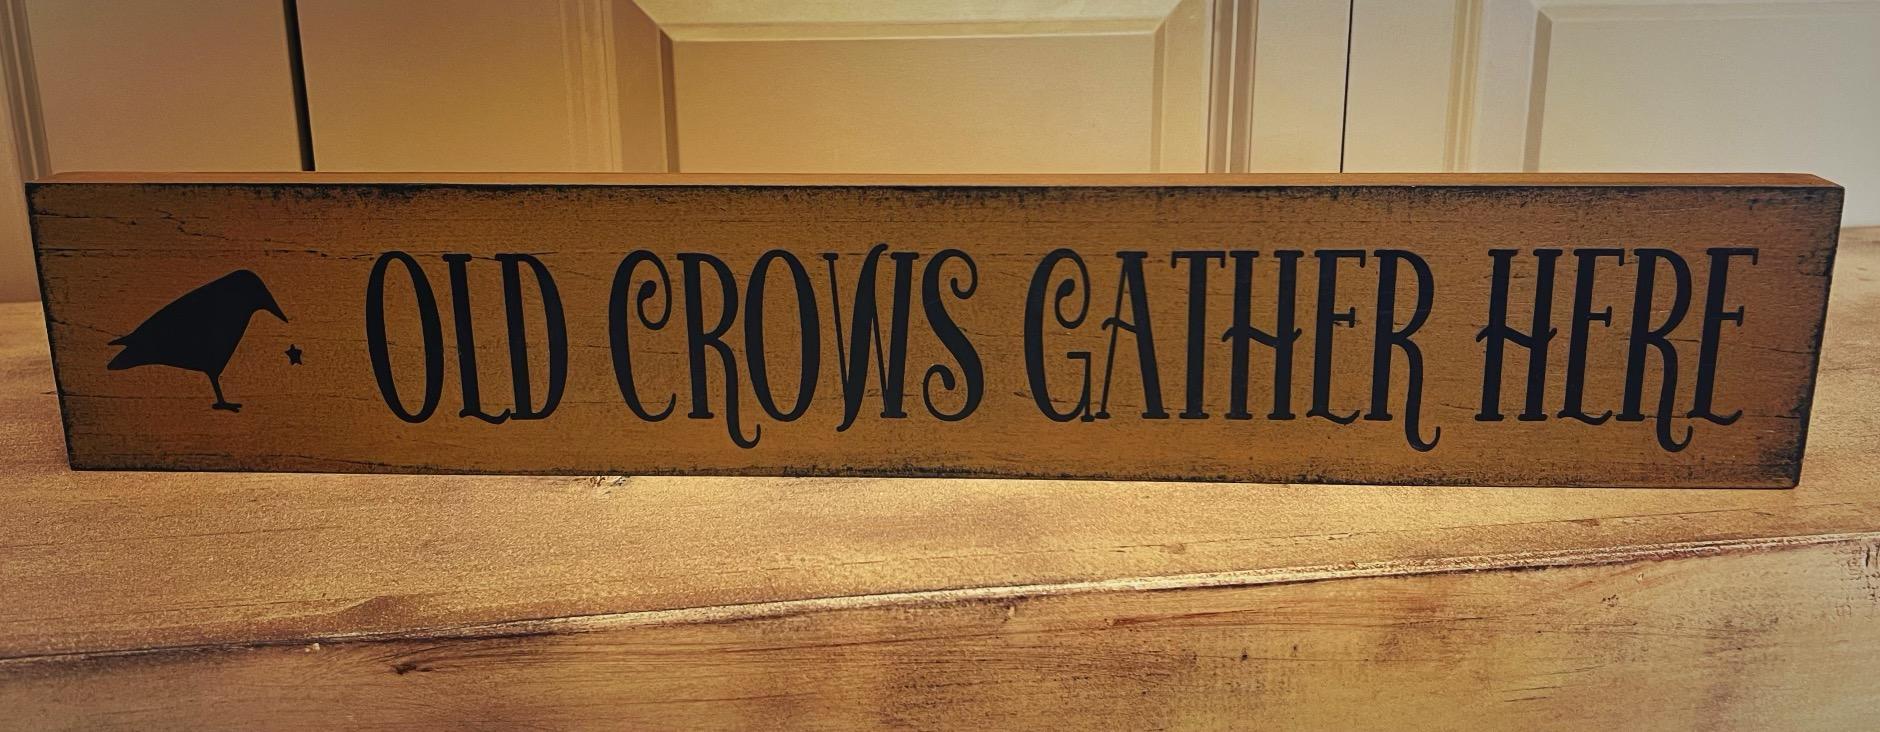 Old Crows Gather Here - Sign